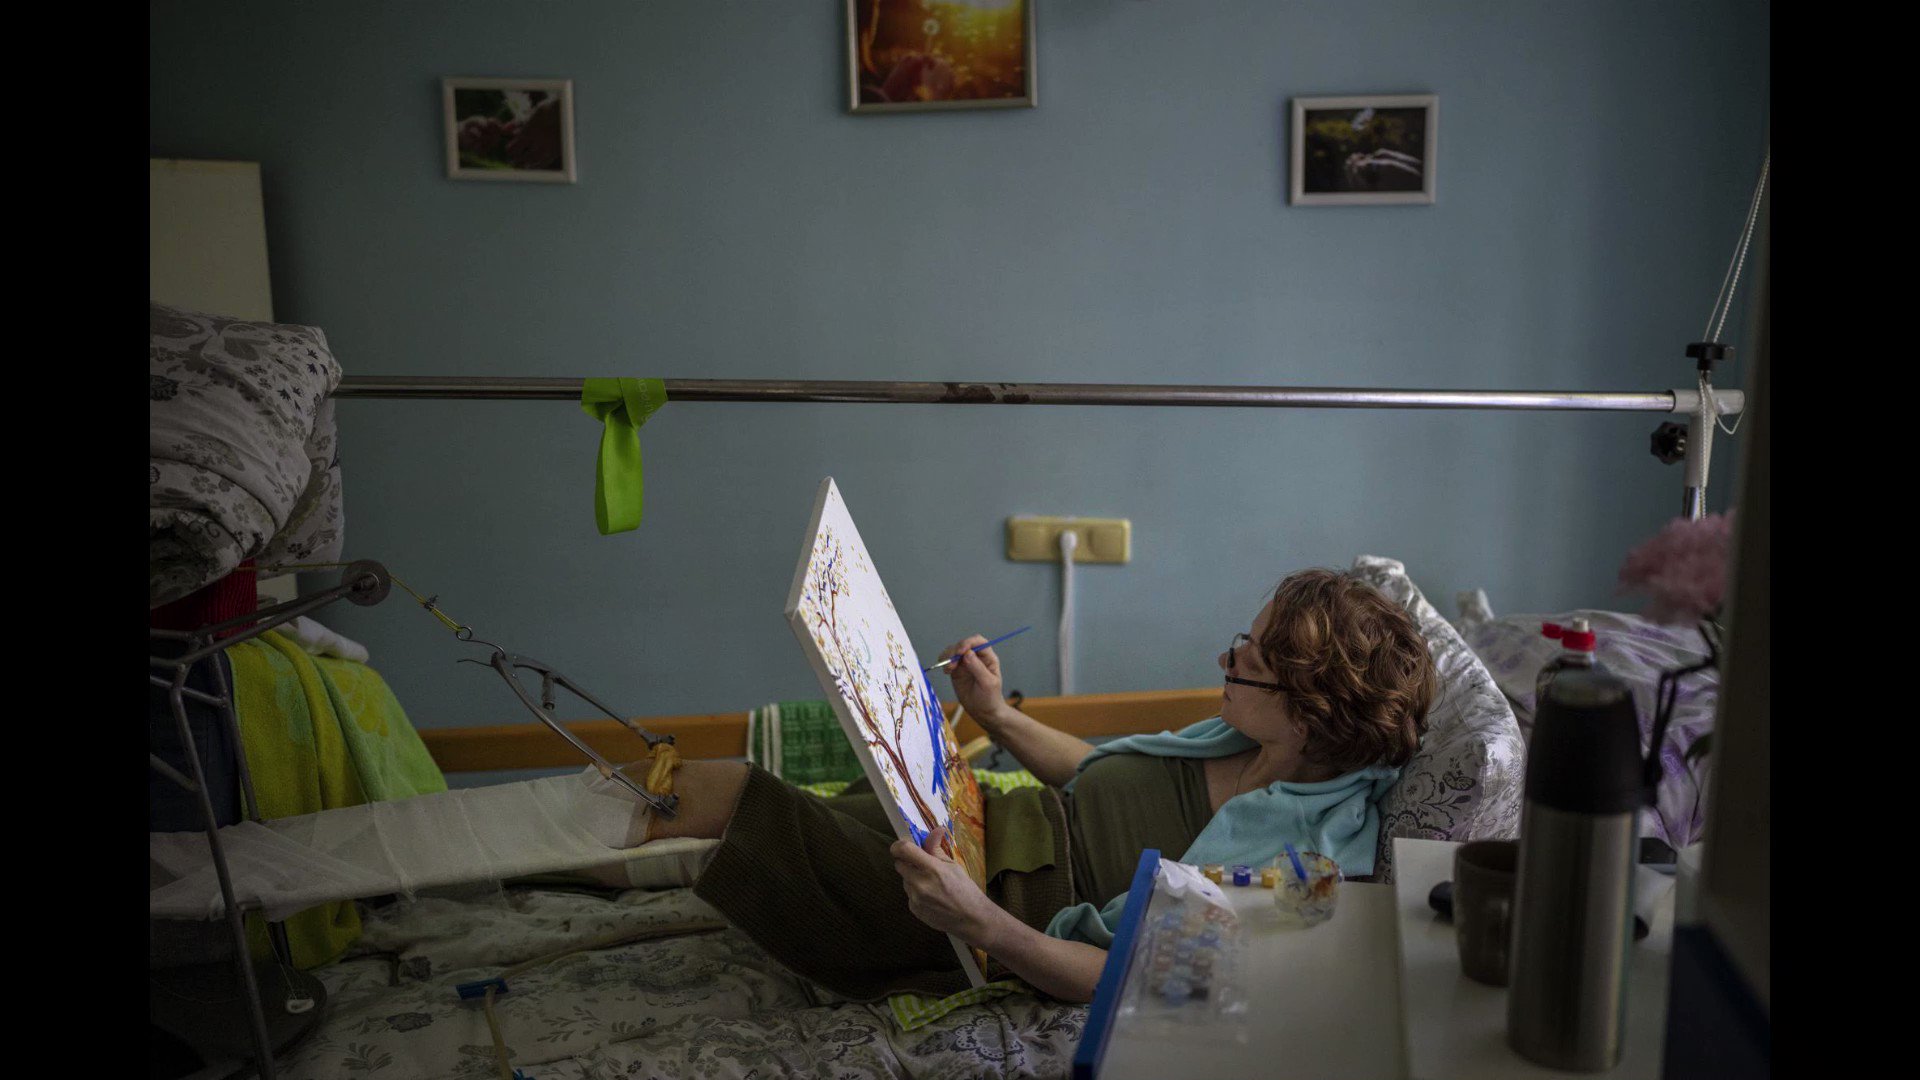 @AP_Europe: The stories of people who undergo amputations during conflict are as varied as their wounds, as are their journeys of reconciliation with their injuries. Photos by @EmilioMorenatti reporting from Ukraine.More: